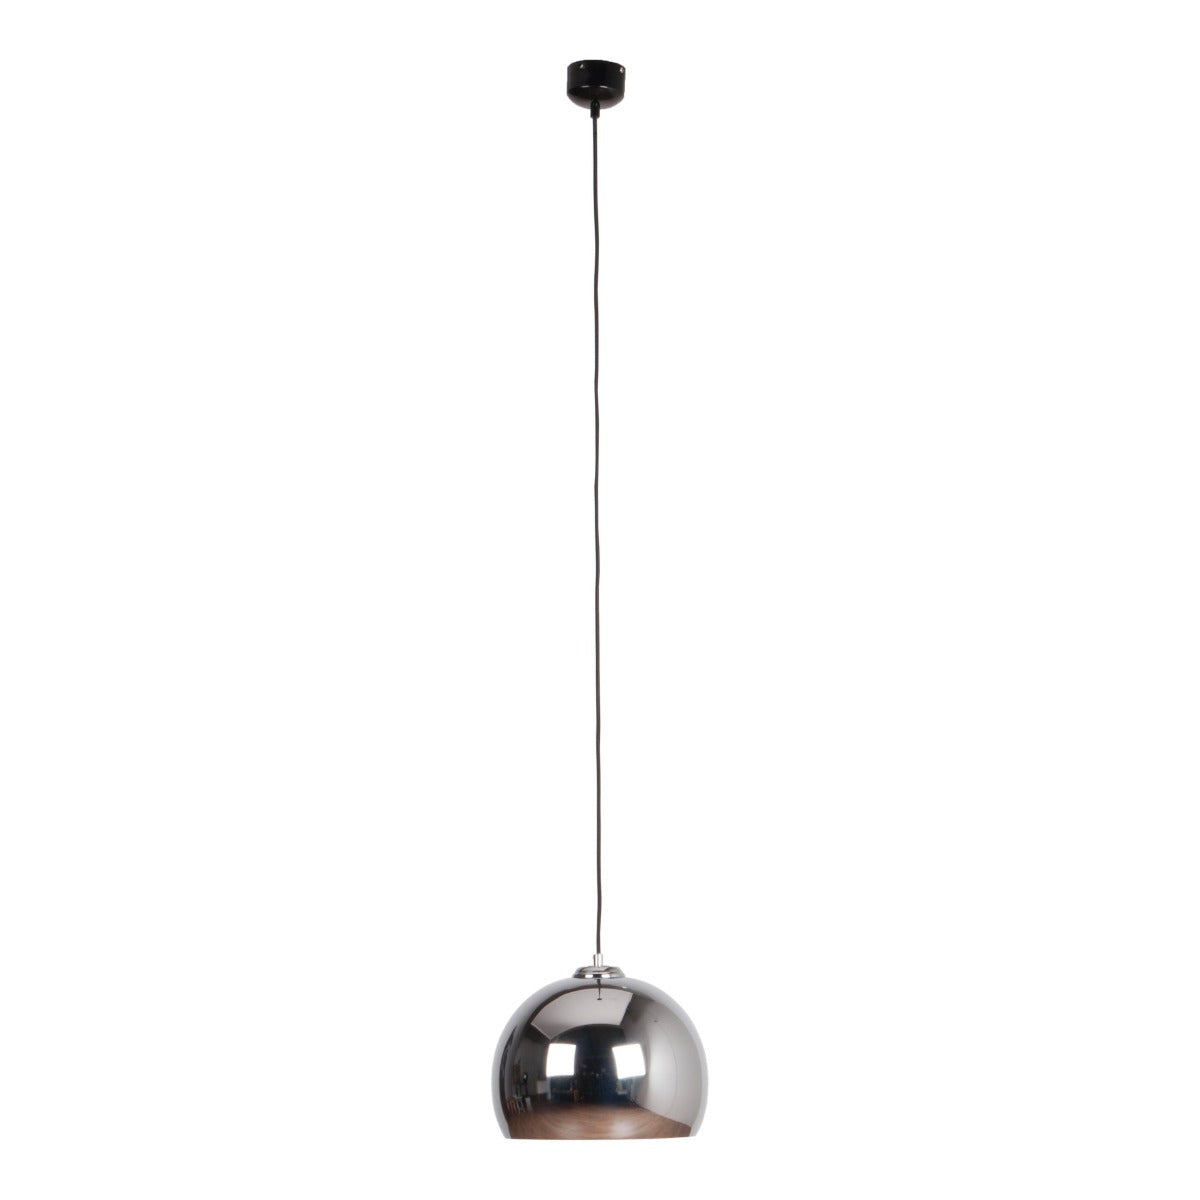 Interesting accessories in the room make the interior more cozy or reflect the atmosphere in the whole house. One of such elements is the Big Glow hanging lamp. Chrome metal in the shape of a ball on a black cable seems to be created exactly to hang it above the table in a modern dining room. It can complement the industrial style in the bedroom above the bedside table.